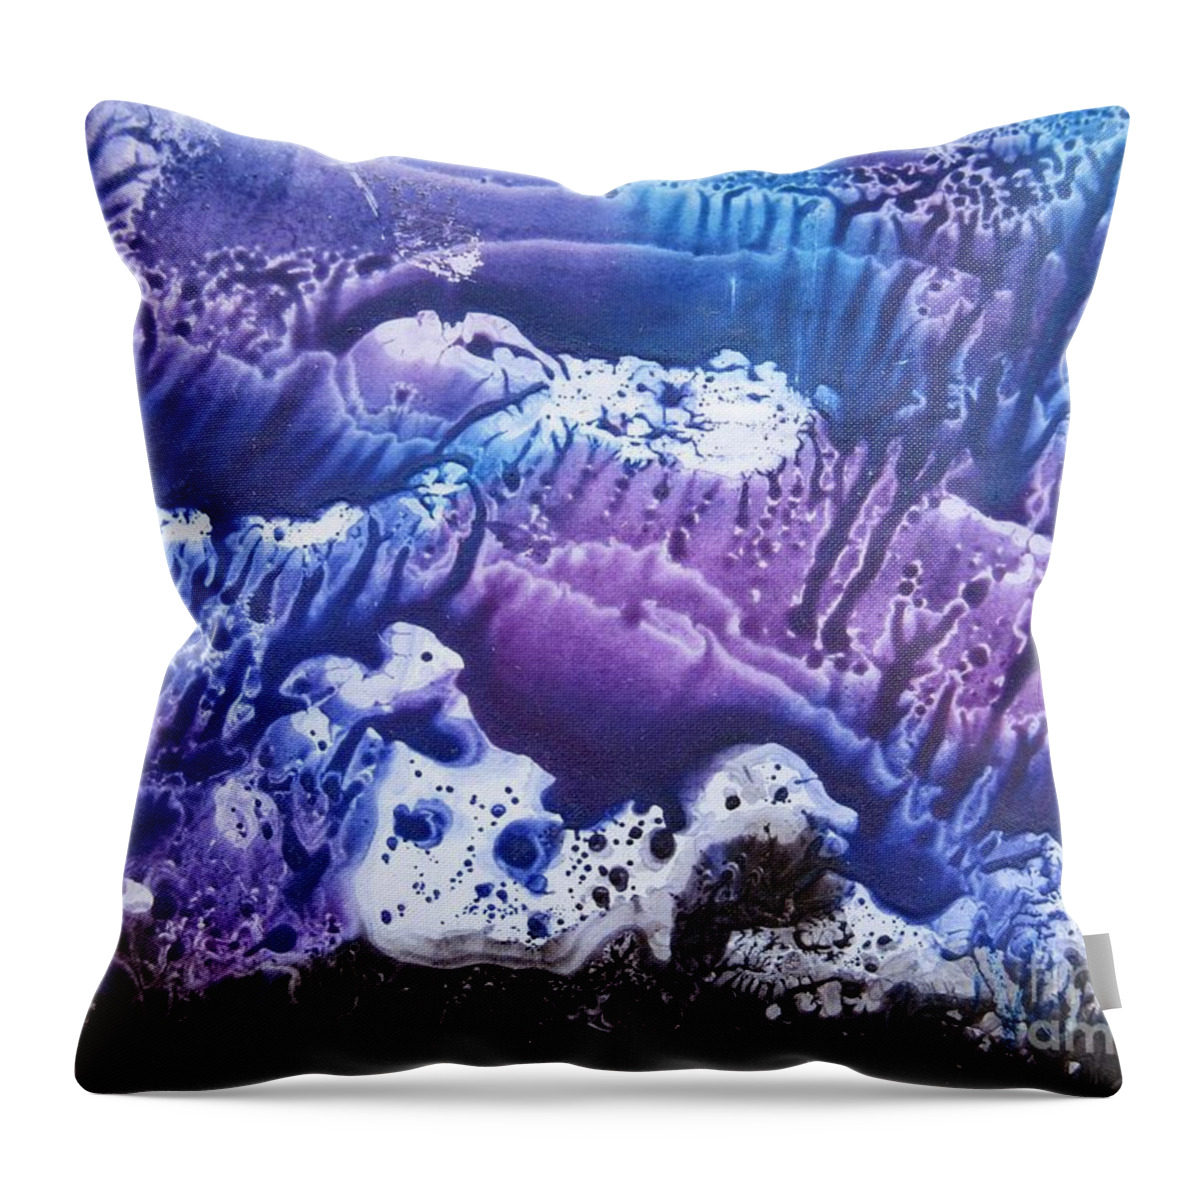 Imagination Throw Pillow featuring the painting Imagination 3 by Vesna Martinjak